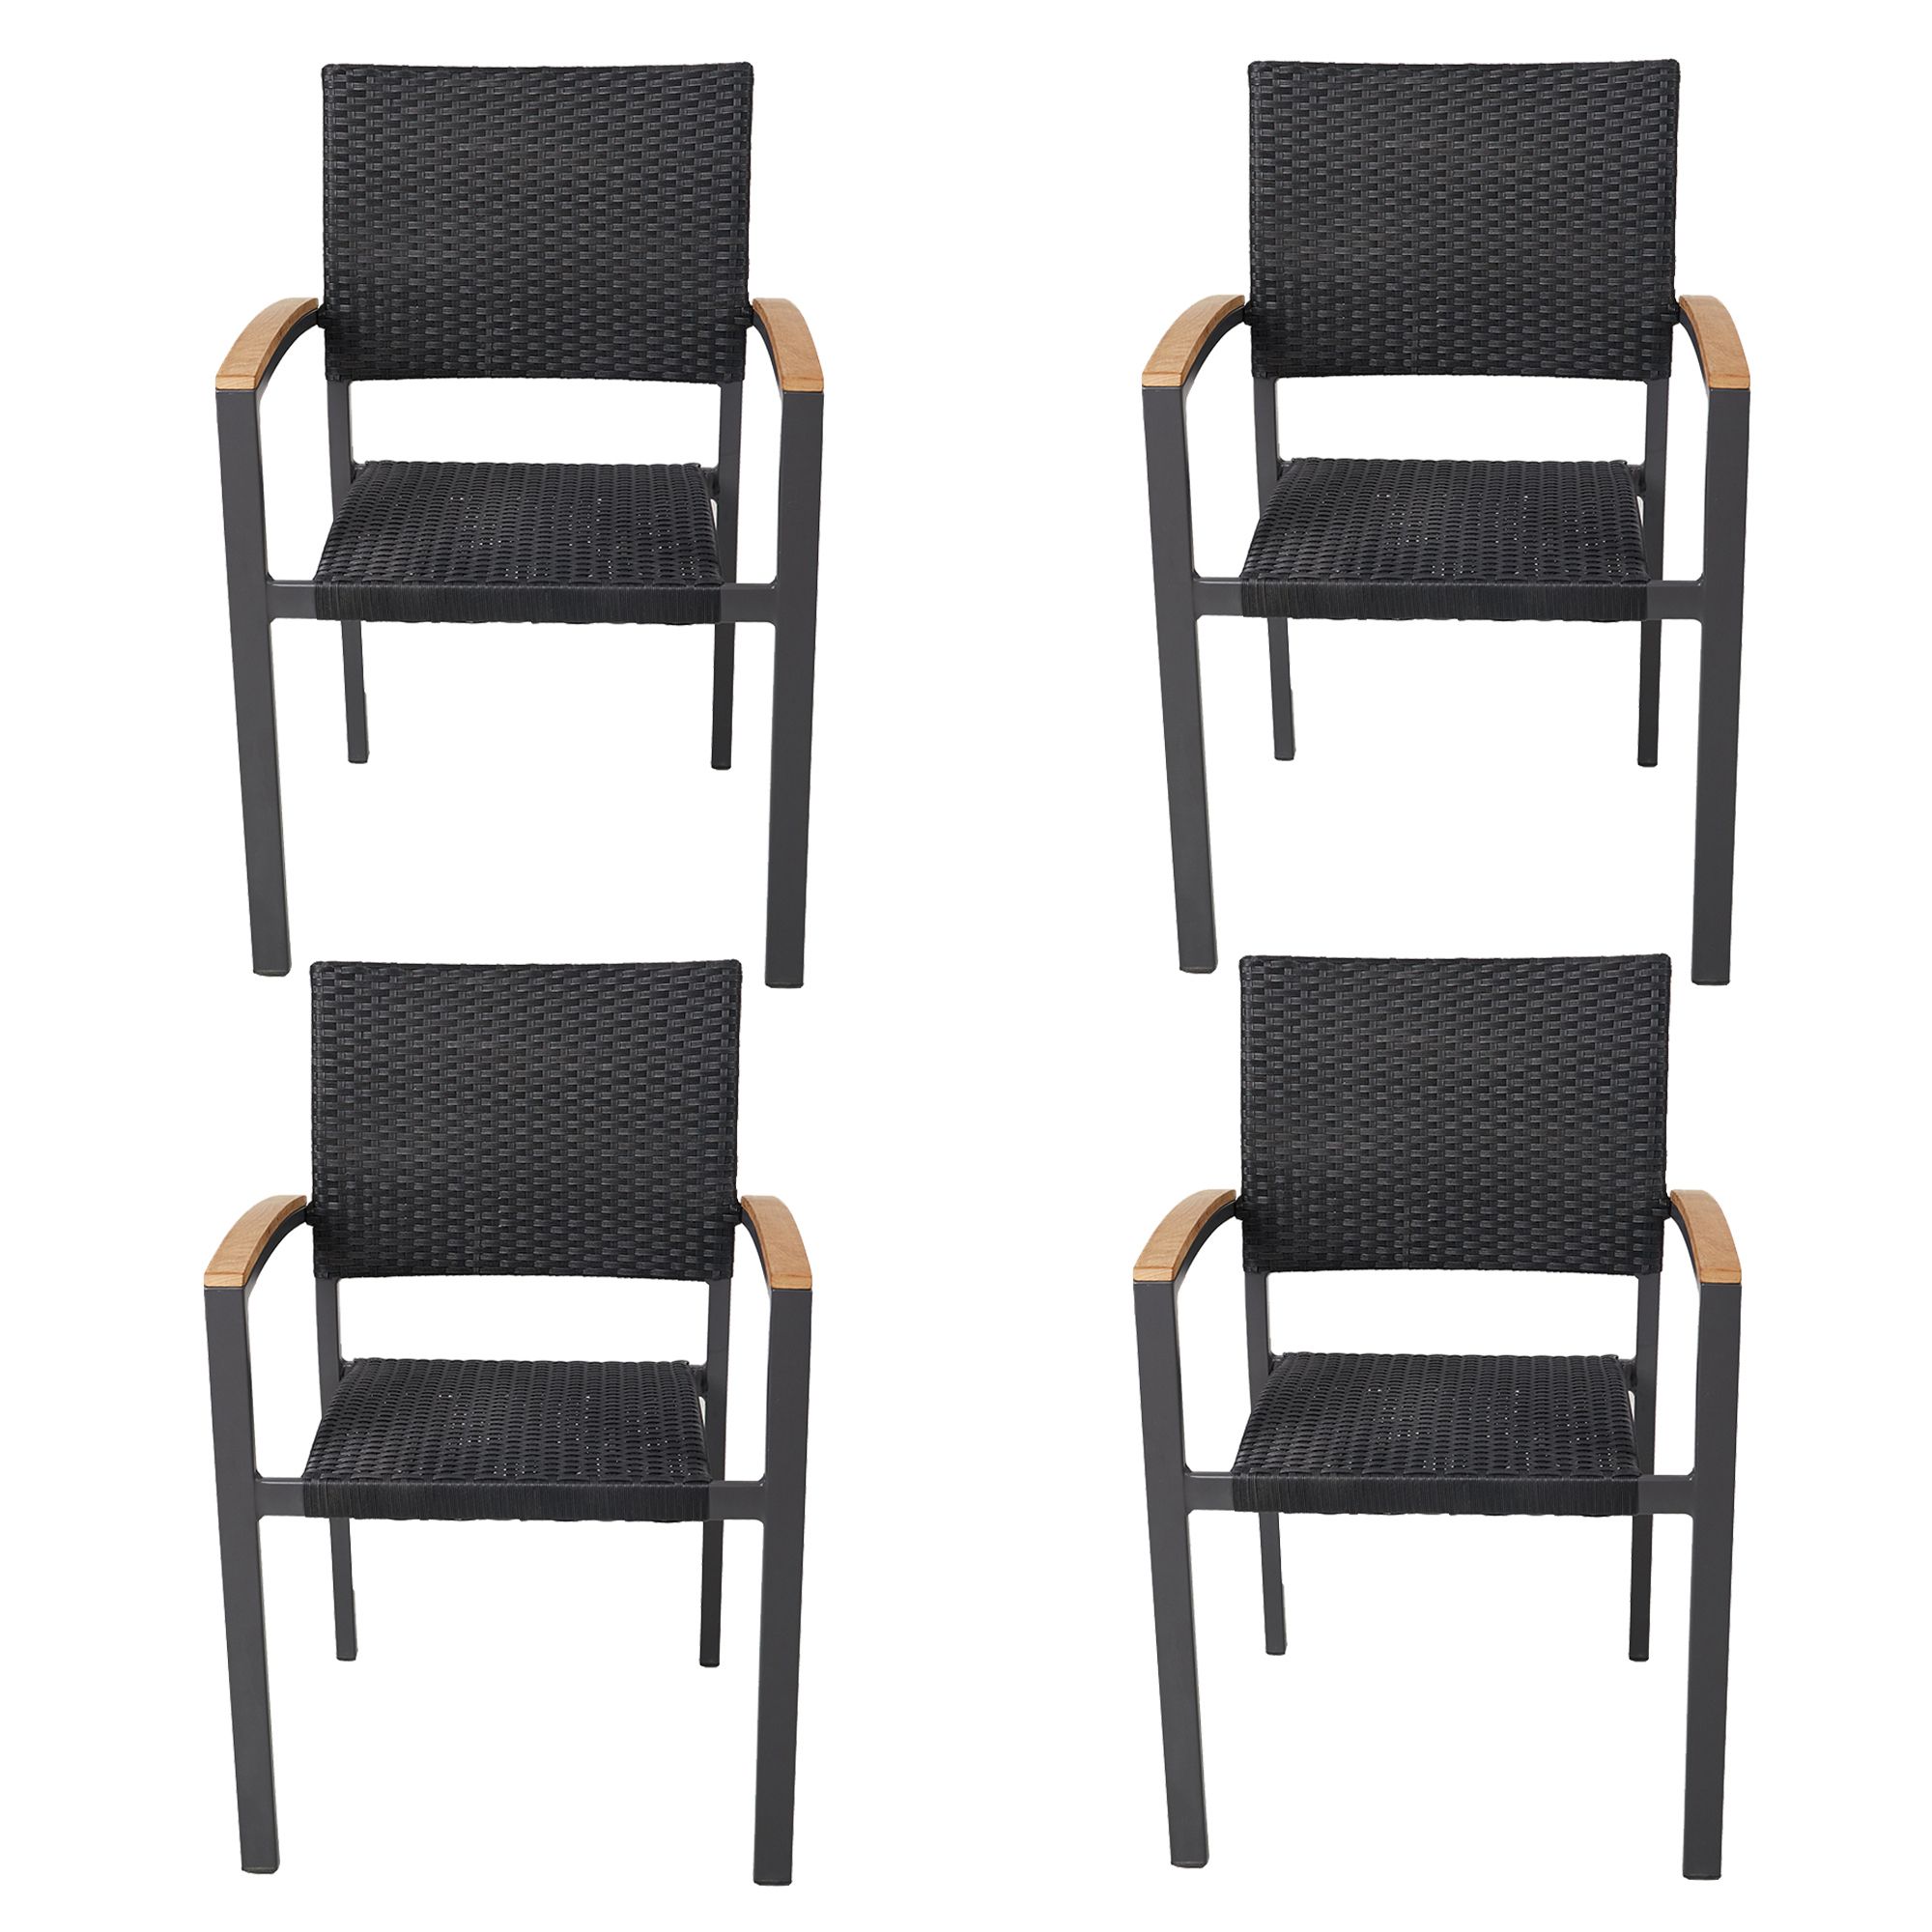 Black Outdoor Dining Chairs Throughout Most Recent Karmas Product 4 Pack Arm Dining Chair Kitchen Patio Garden Wicker (View 4 of 15)